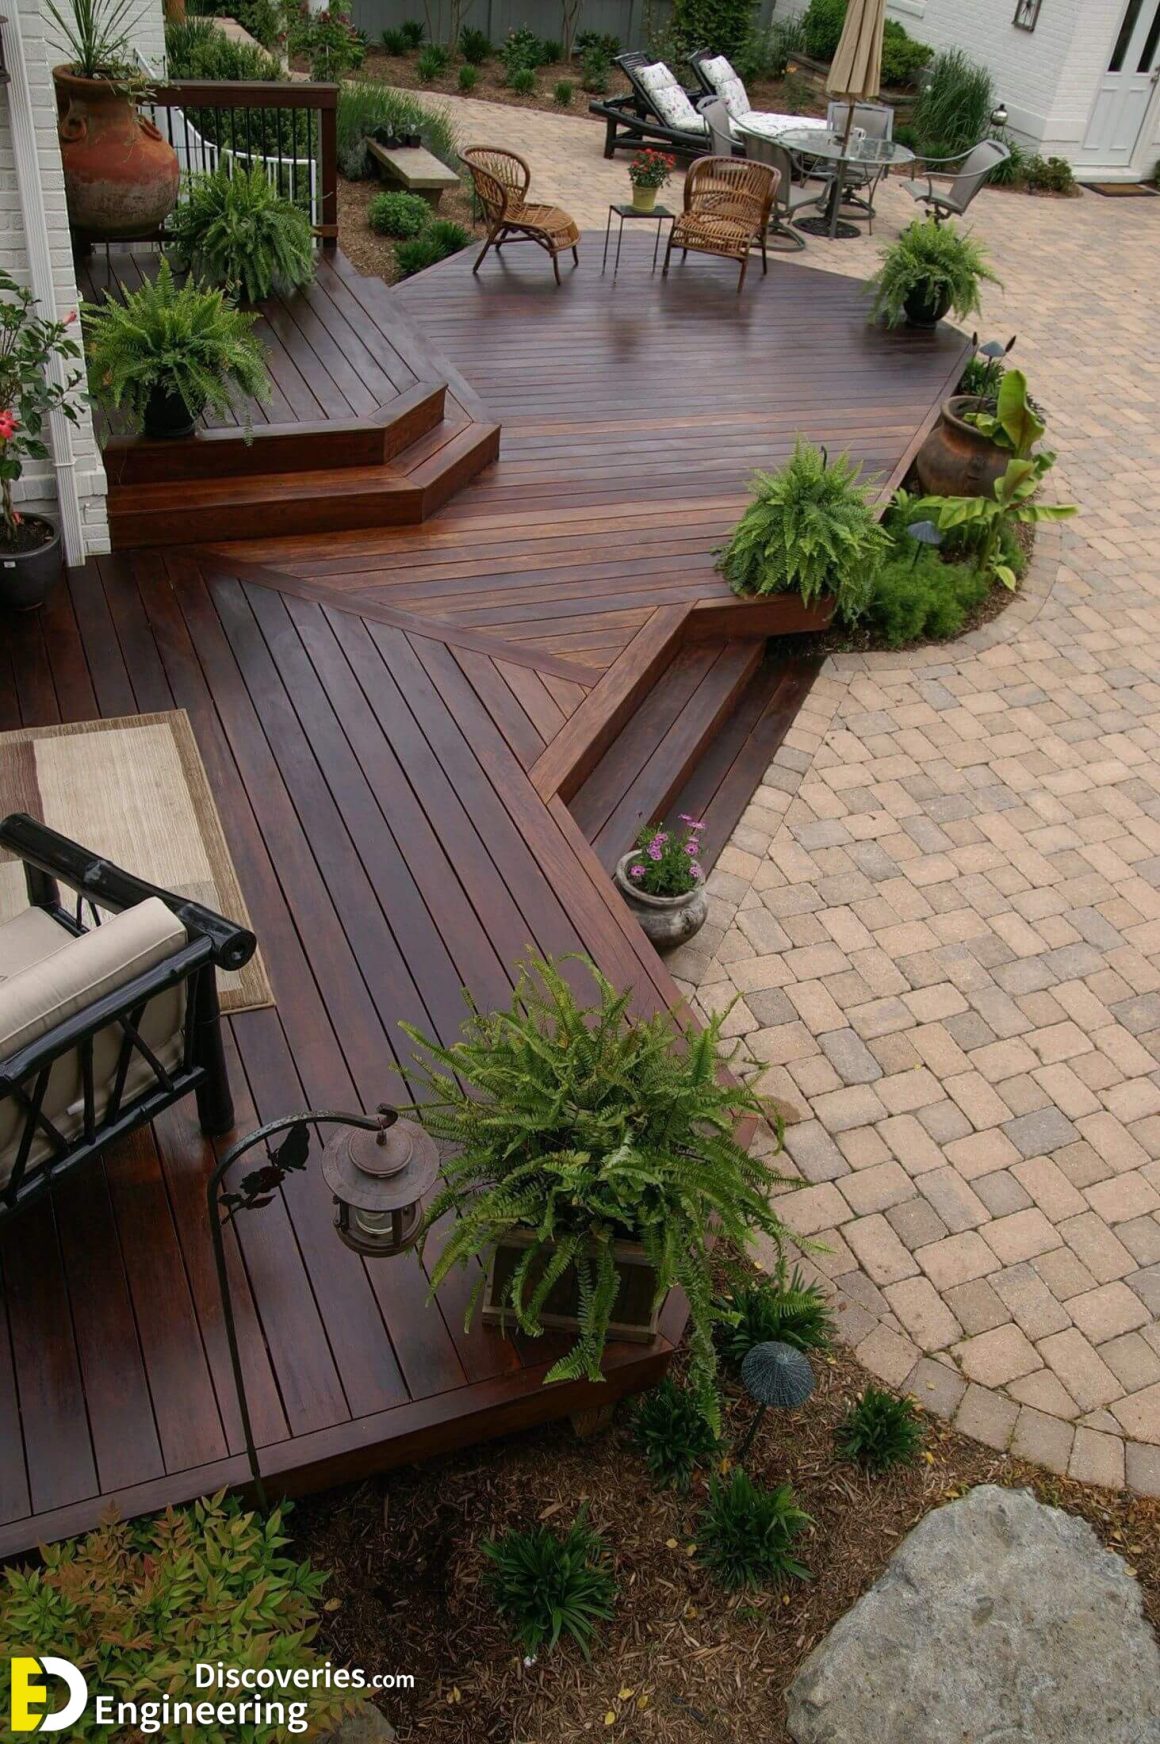 Amazing Backyard Patio And Decor Design Ideas - Engineering Discoveries